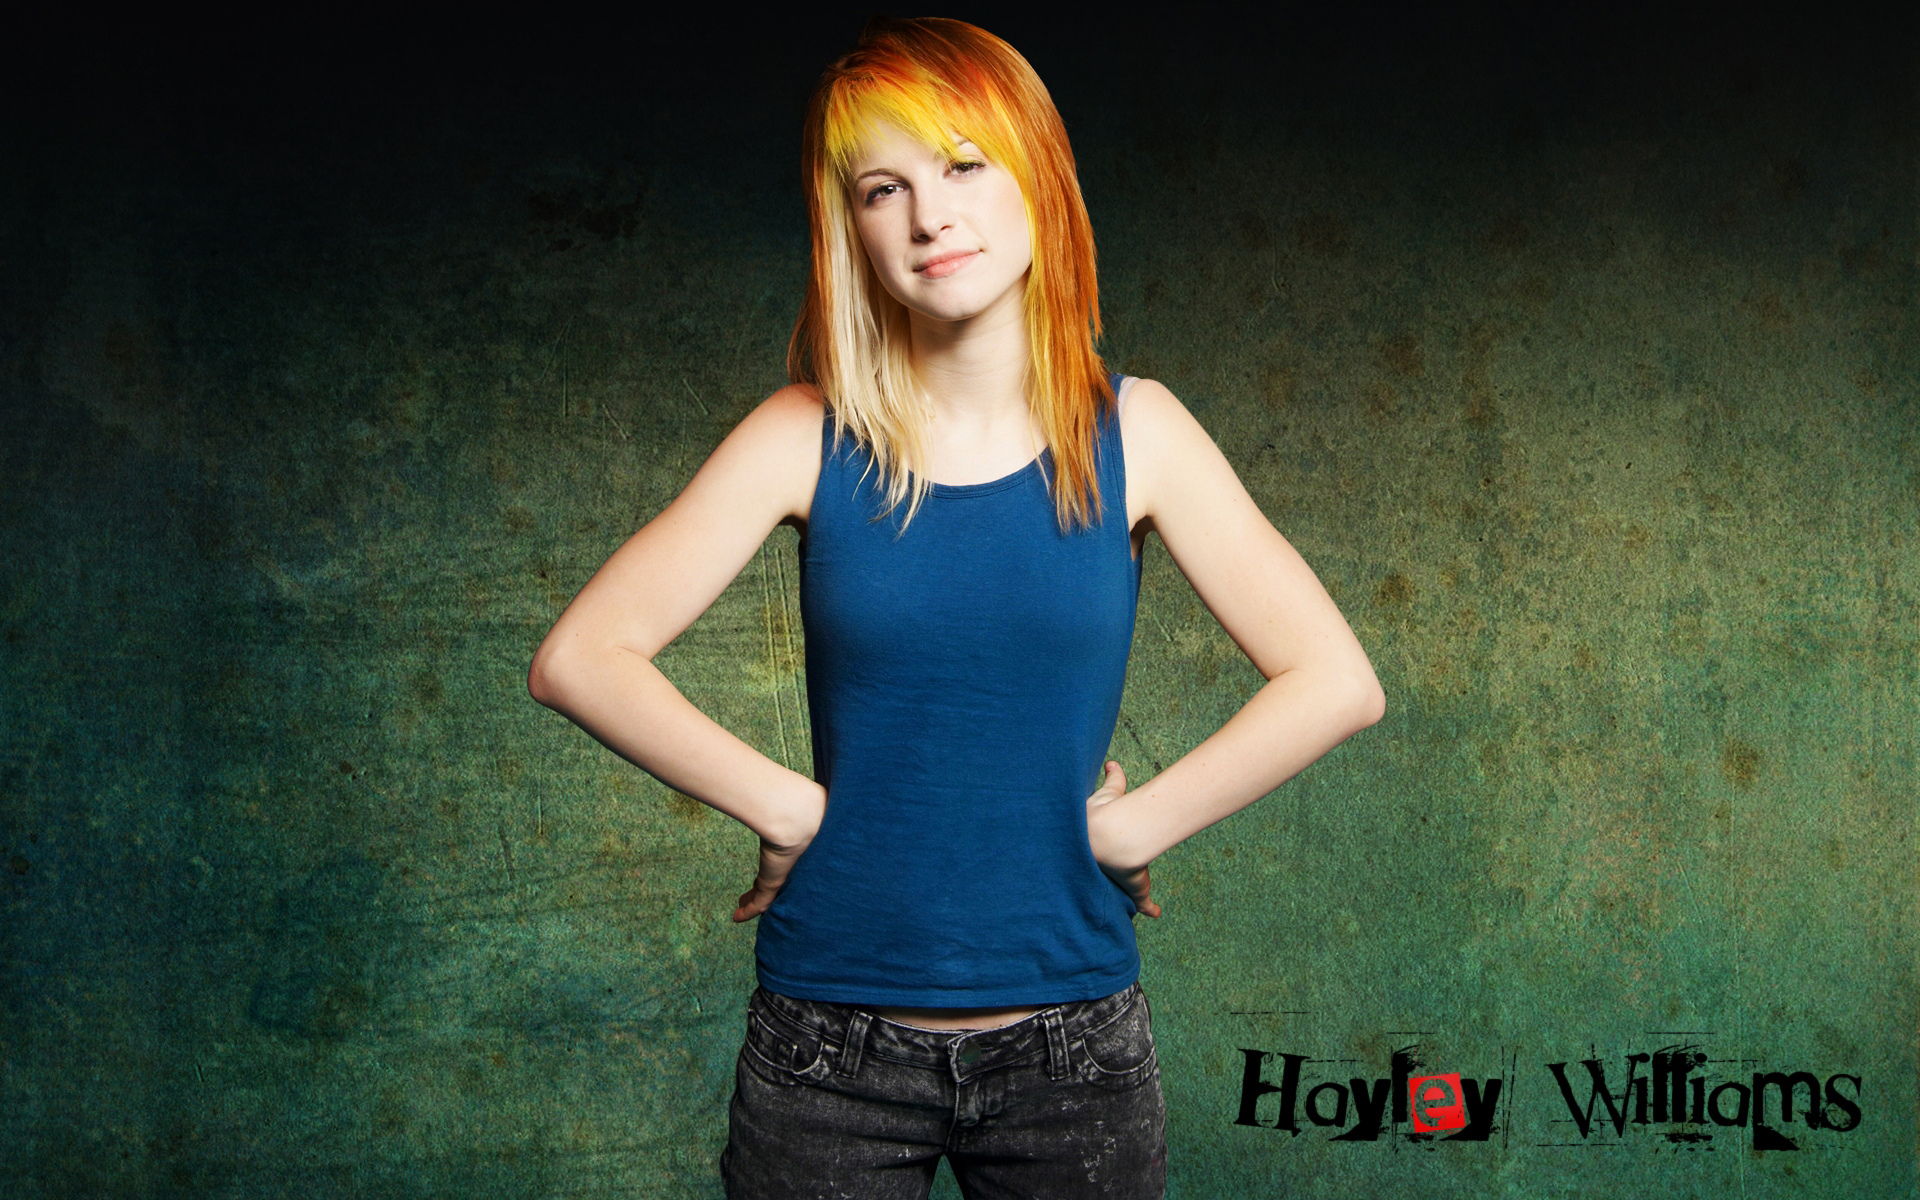 Get Your Pulses Racing with These This Is Why Paramore Gallery's Sultry Hayley Williams Pics.